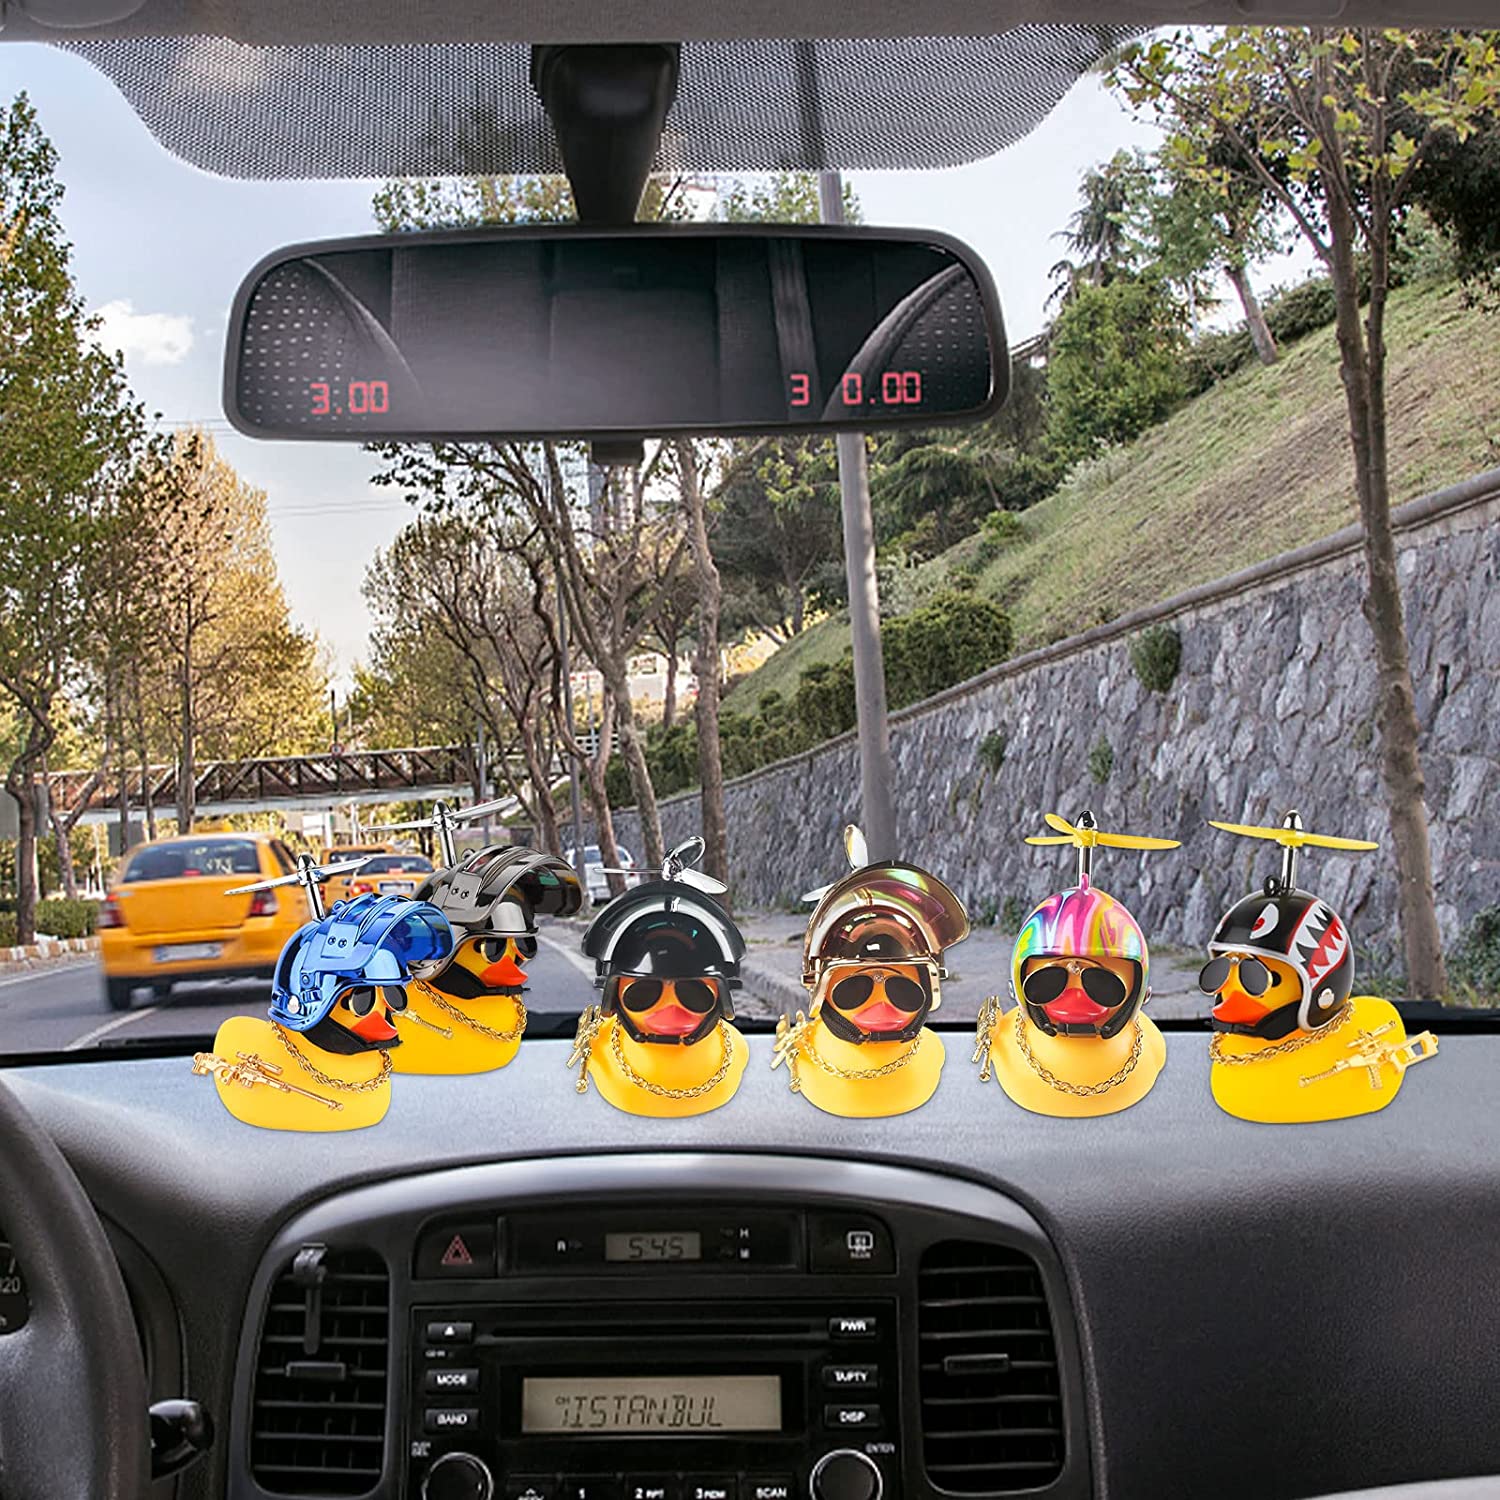 Jeep Life / Rubber Ducks is about that Life